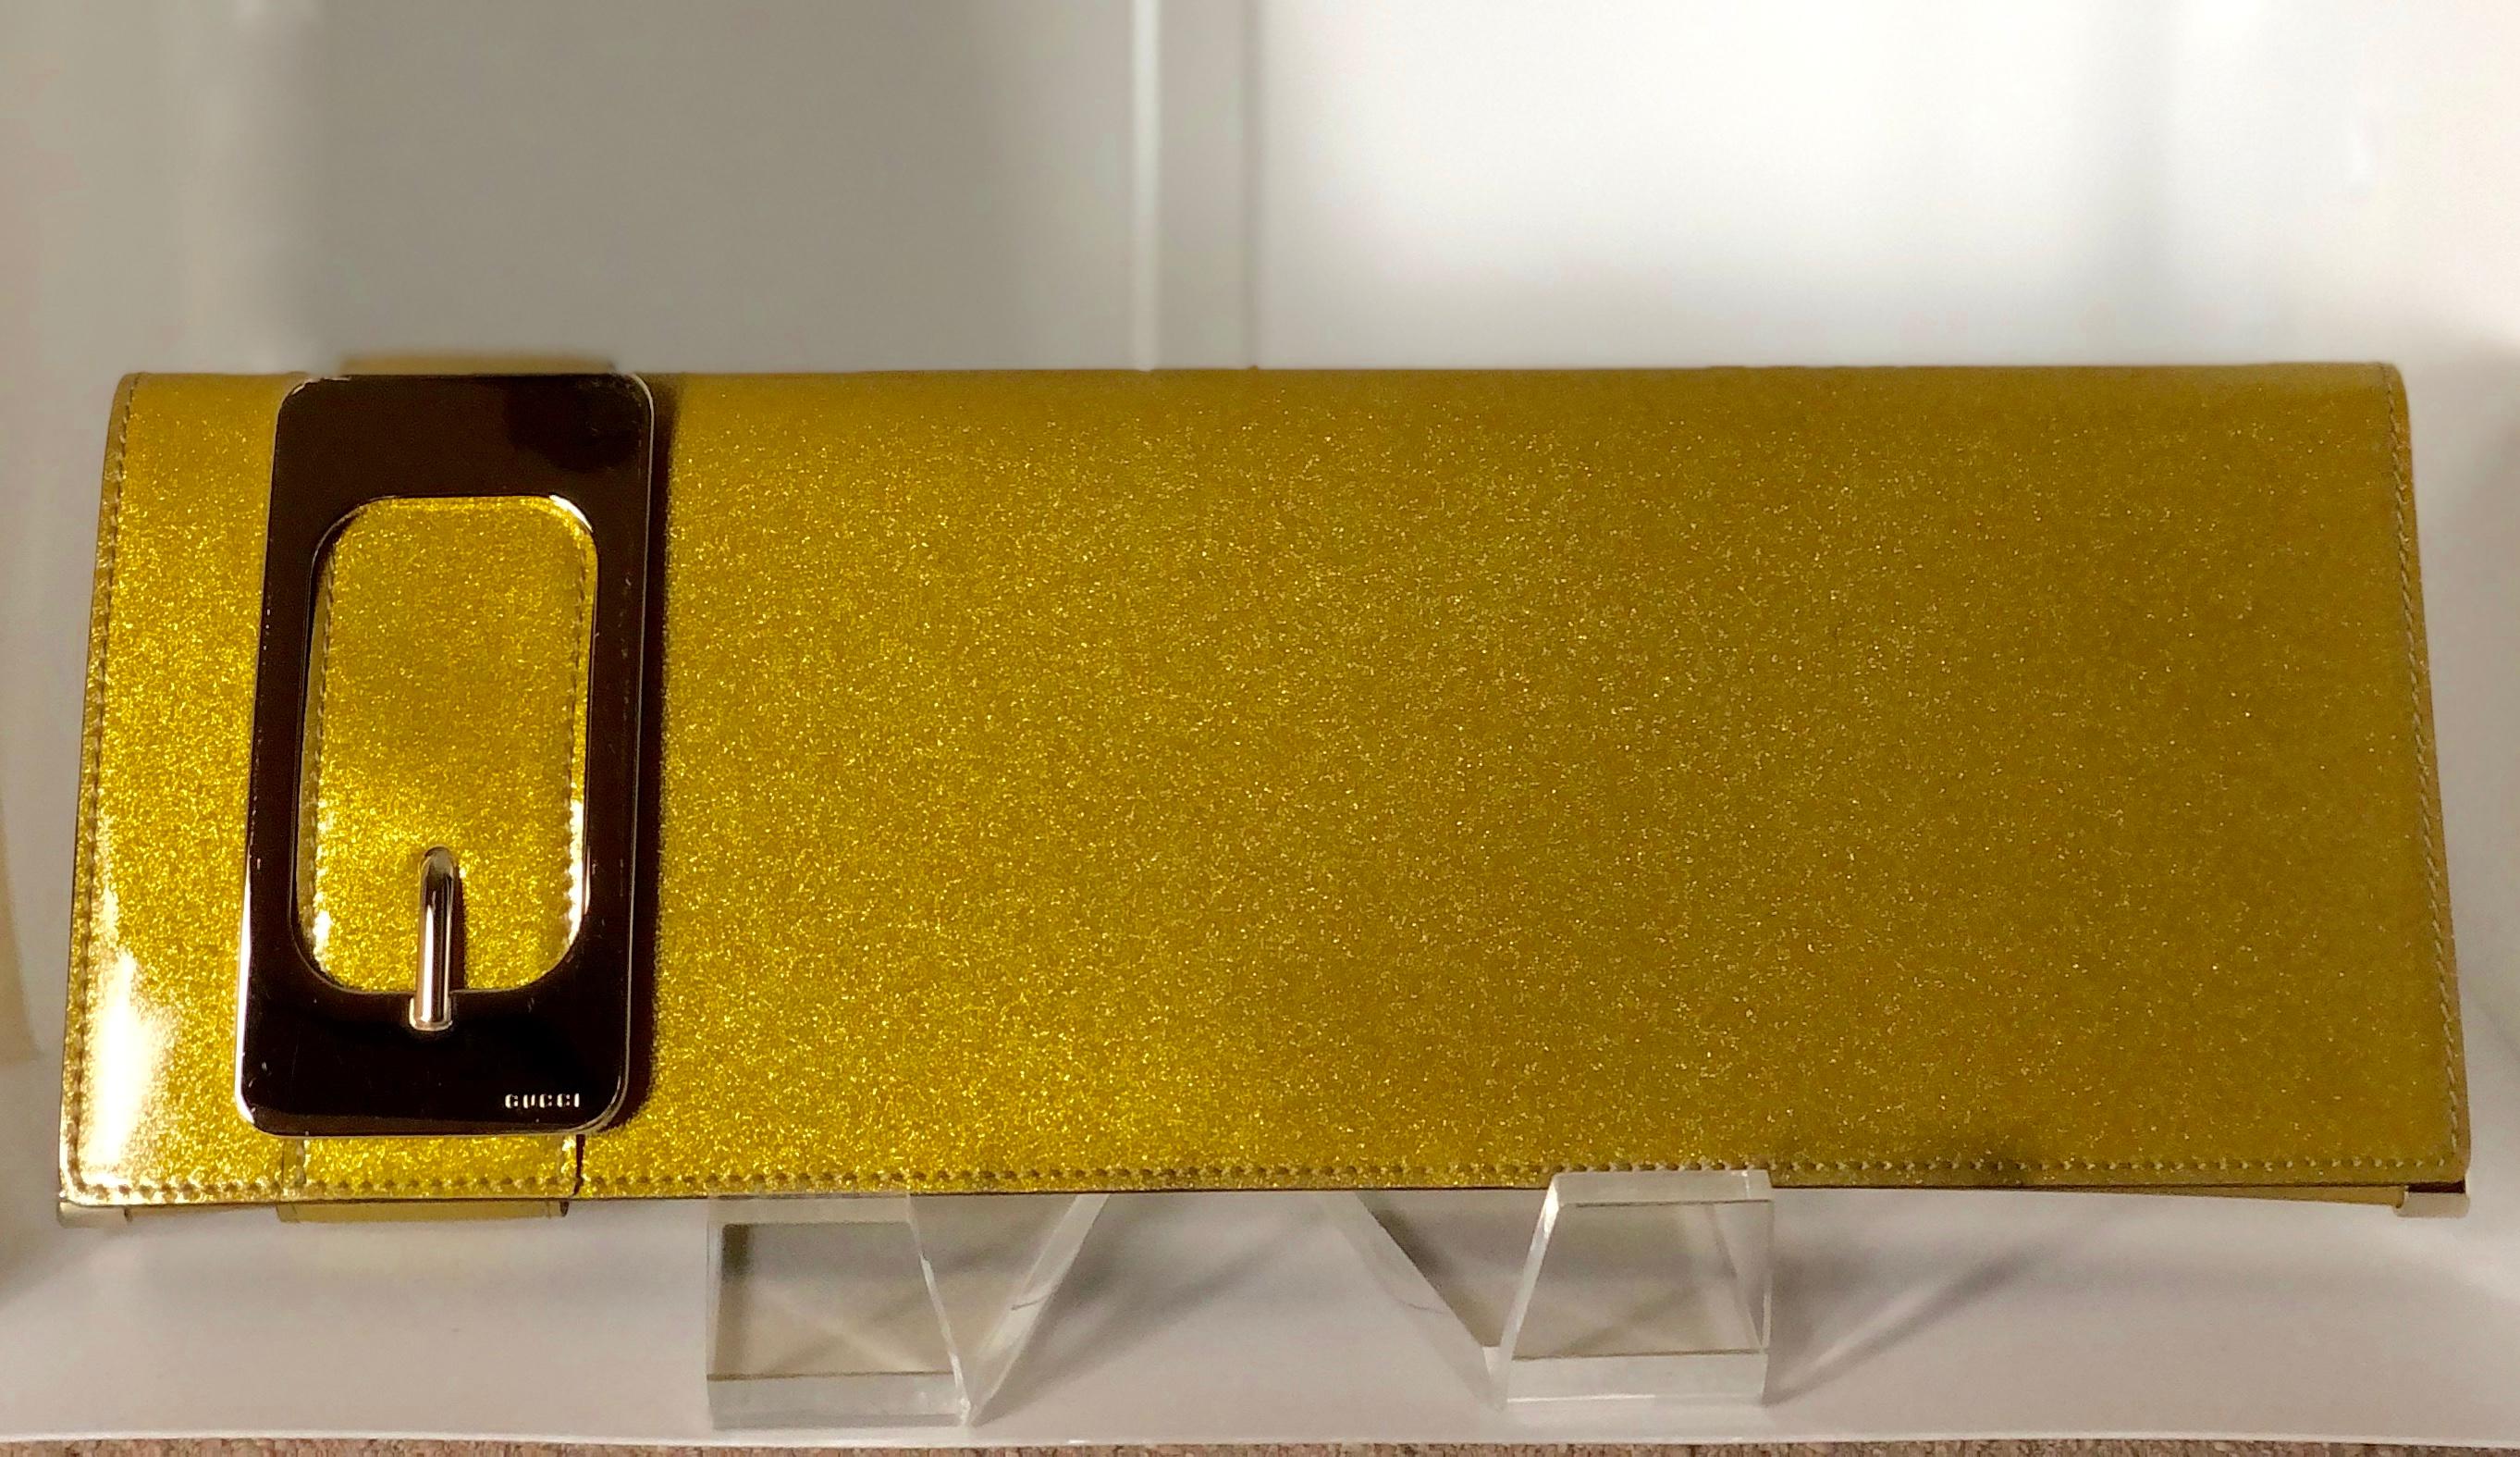 Gucci Iridescent Gold Patent Leather Elongated Clutch with Gold Metal Accents In Good Condition For Sale In Houston, TX